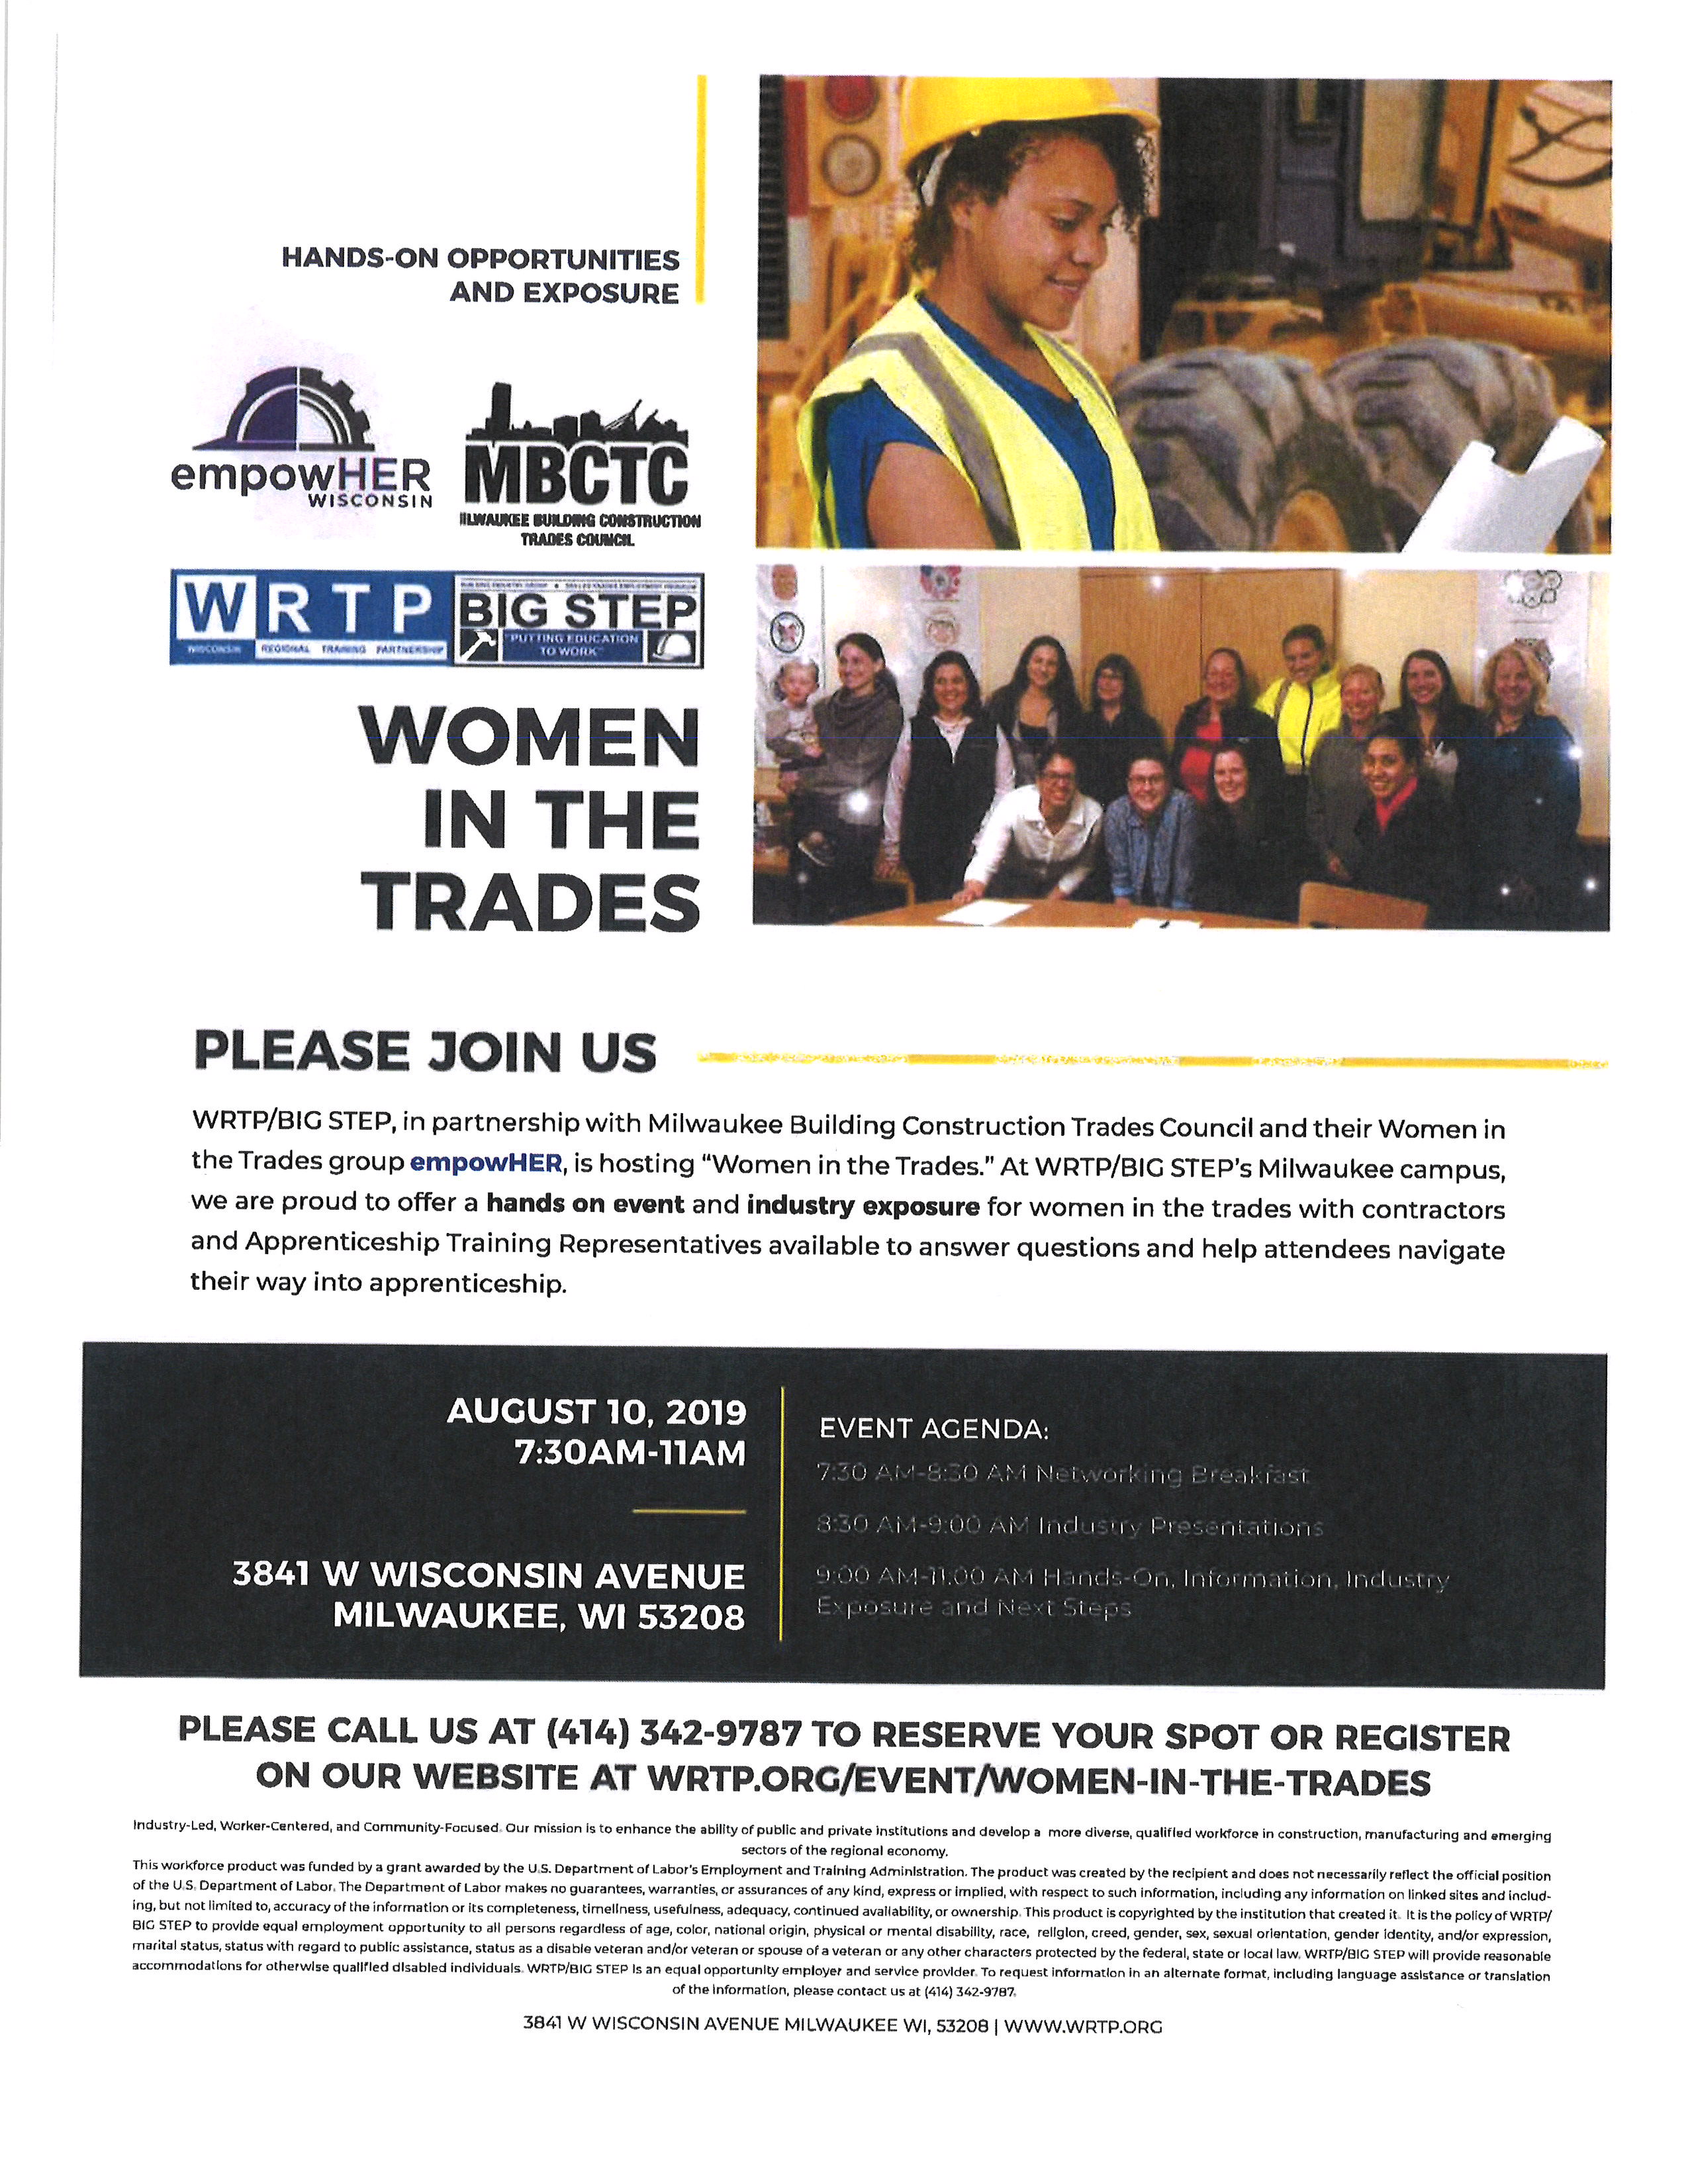 Women in the Trades- August 10